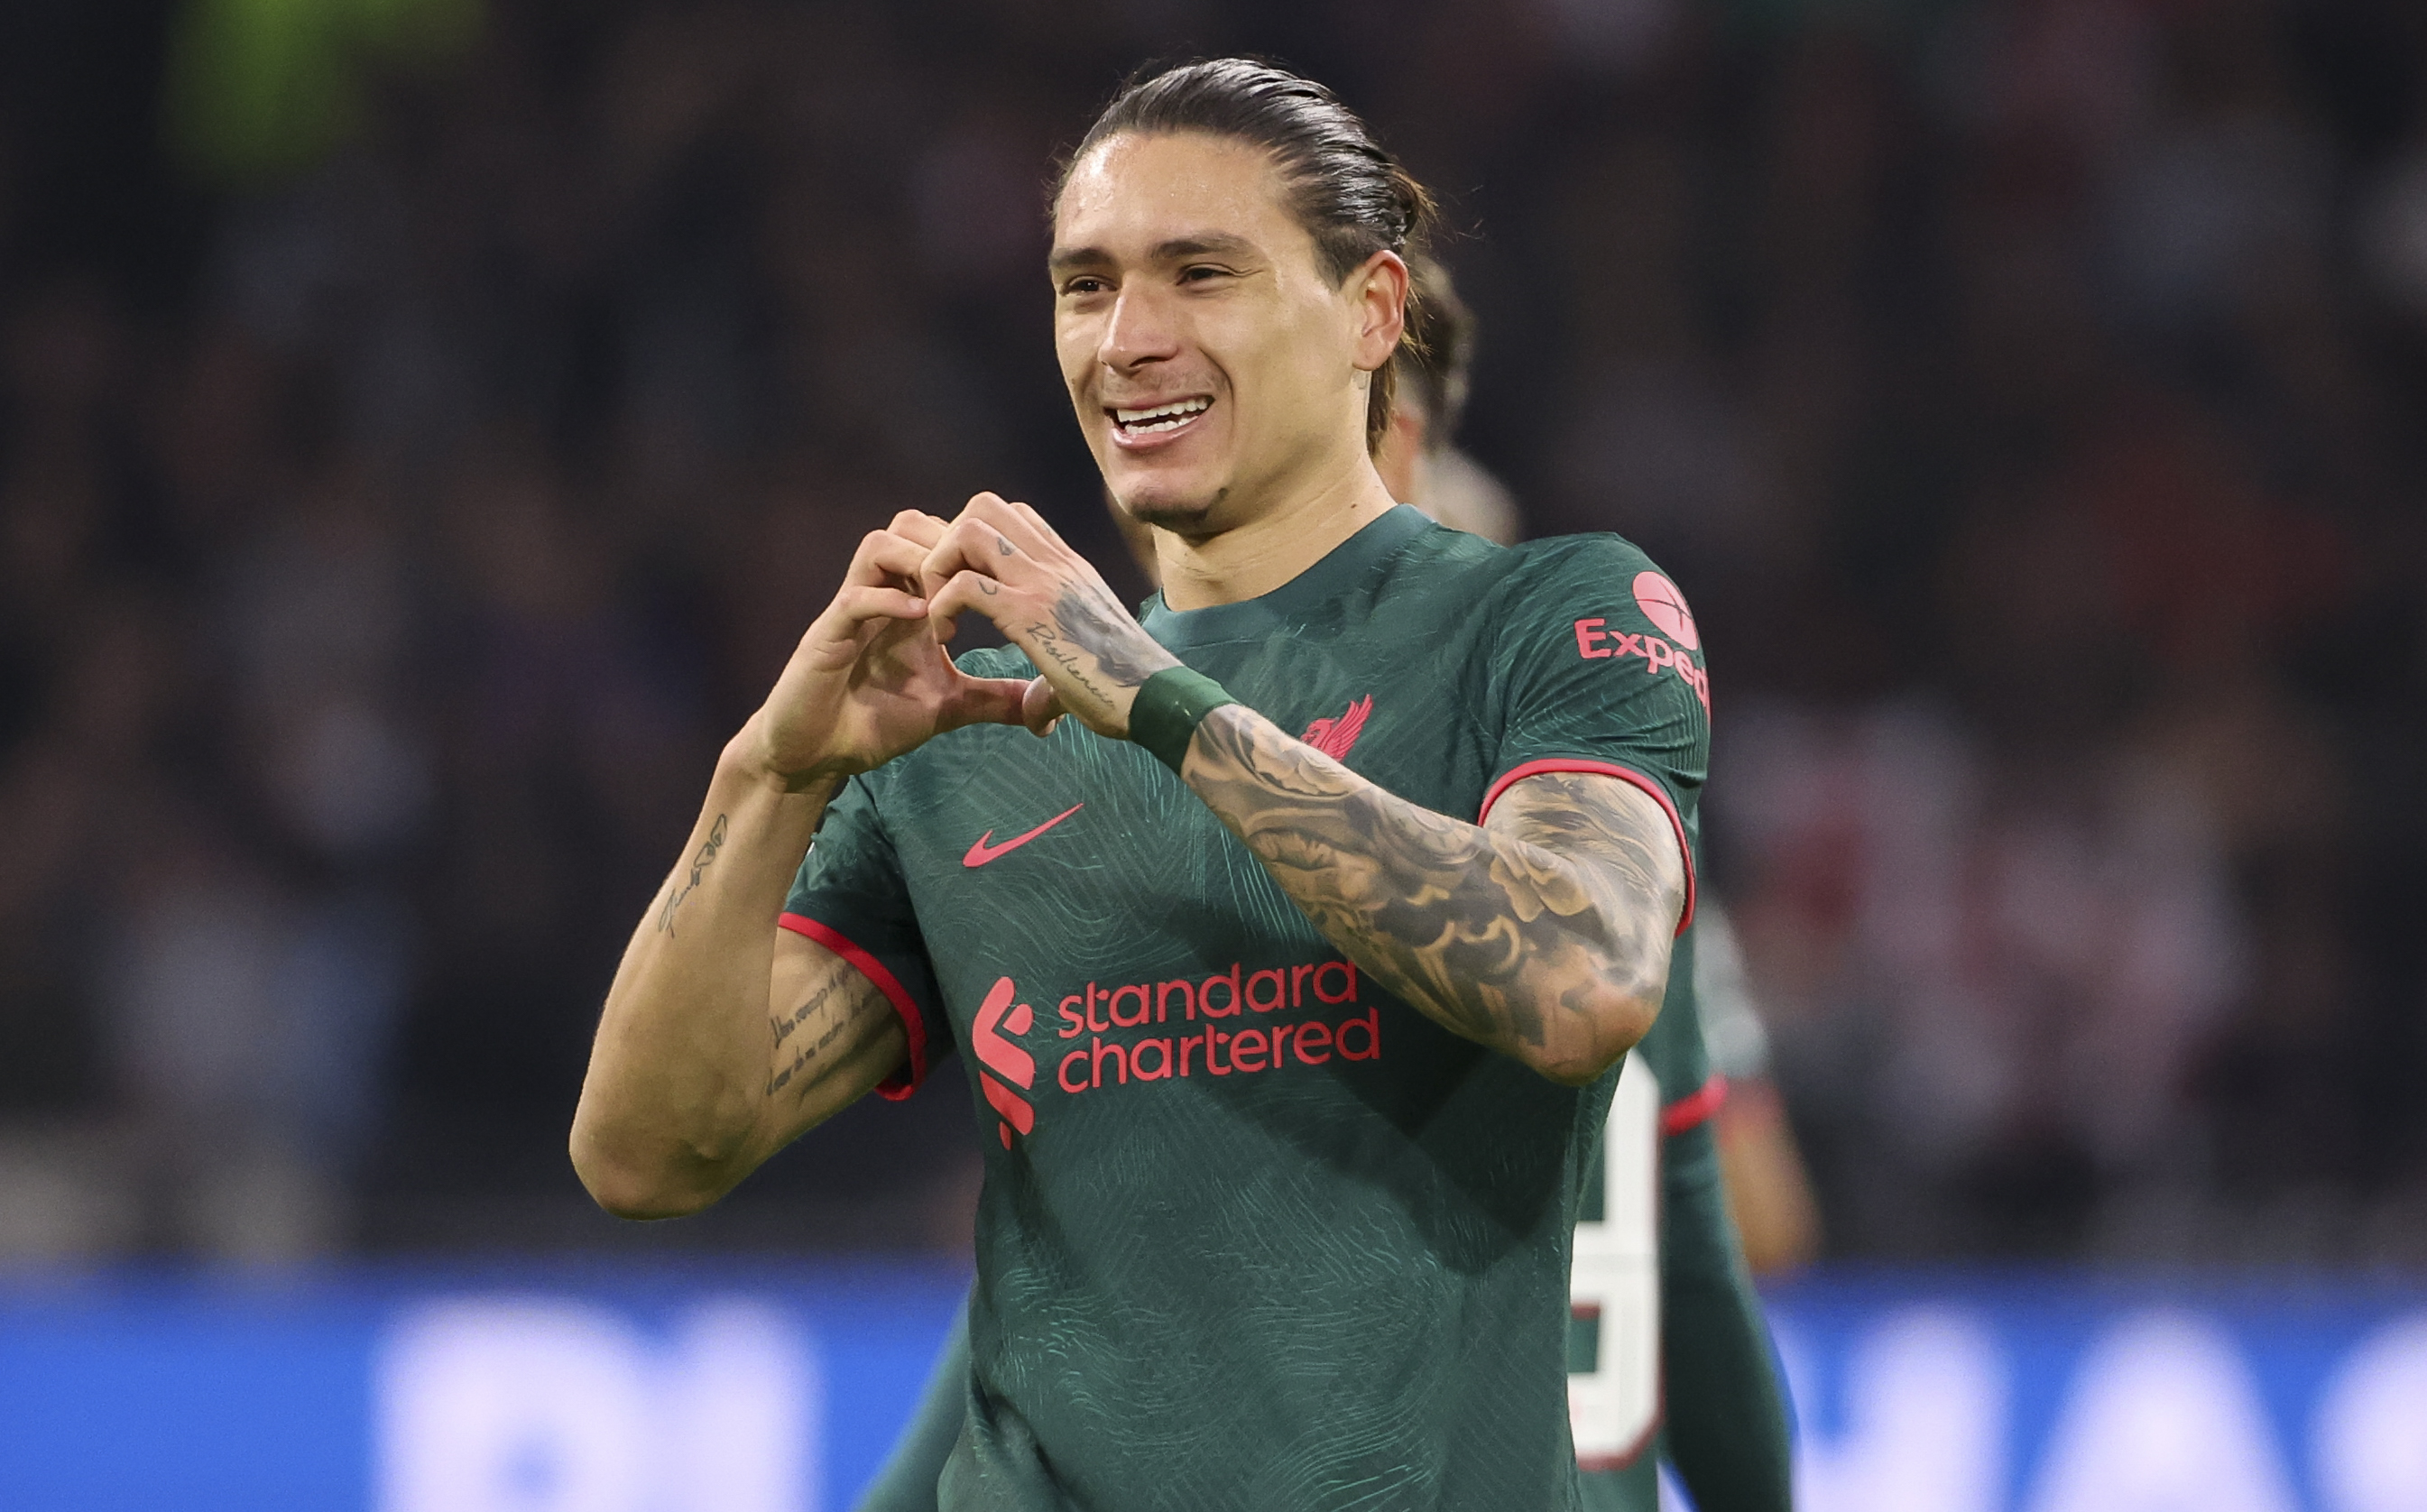 Darwin Nunez of Liverpool celebrates his goal with a heart hand gesture during the UEFA Champions League group A match between AFC Ajax Amsterdam and Liverpool FC at Johan Cruyff Arena (Johan Cruijff ArenA) on October 26, 2022 in Amsterdam, Netherlands.